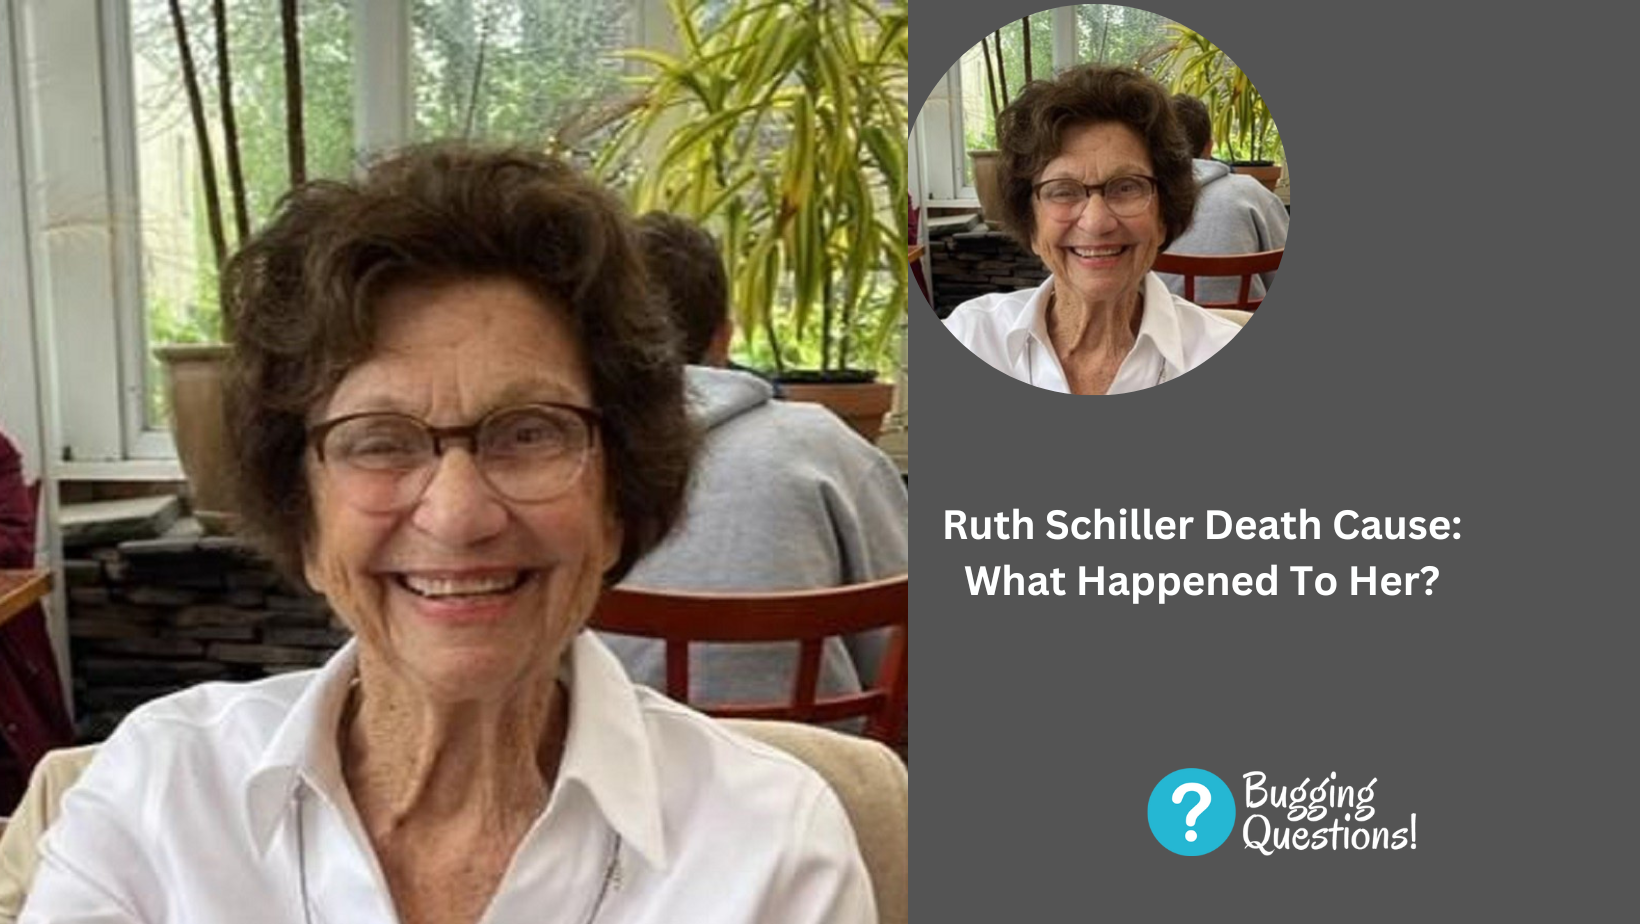 Ruth Schiller Death Cause: What Happened To Her?